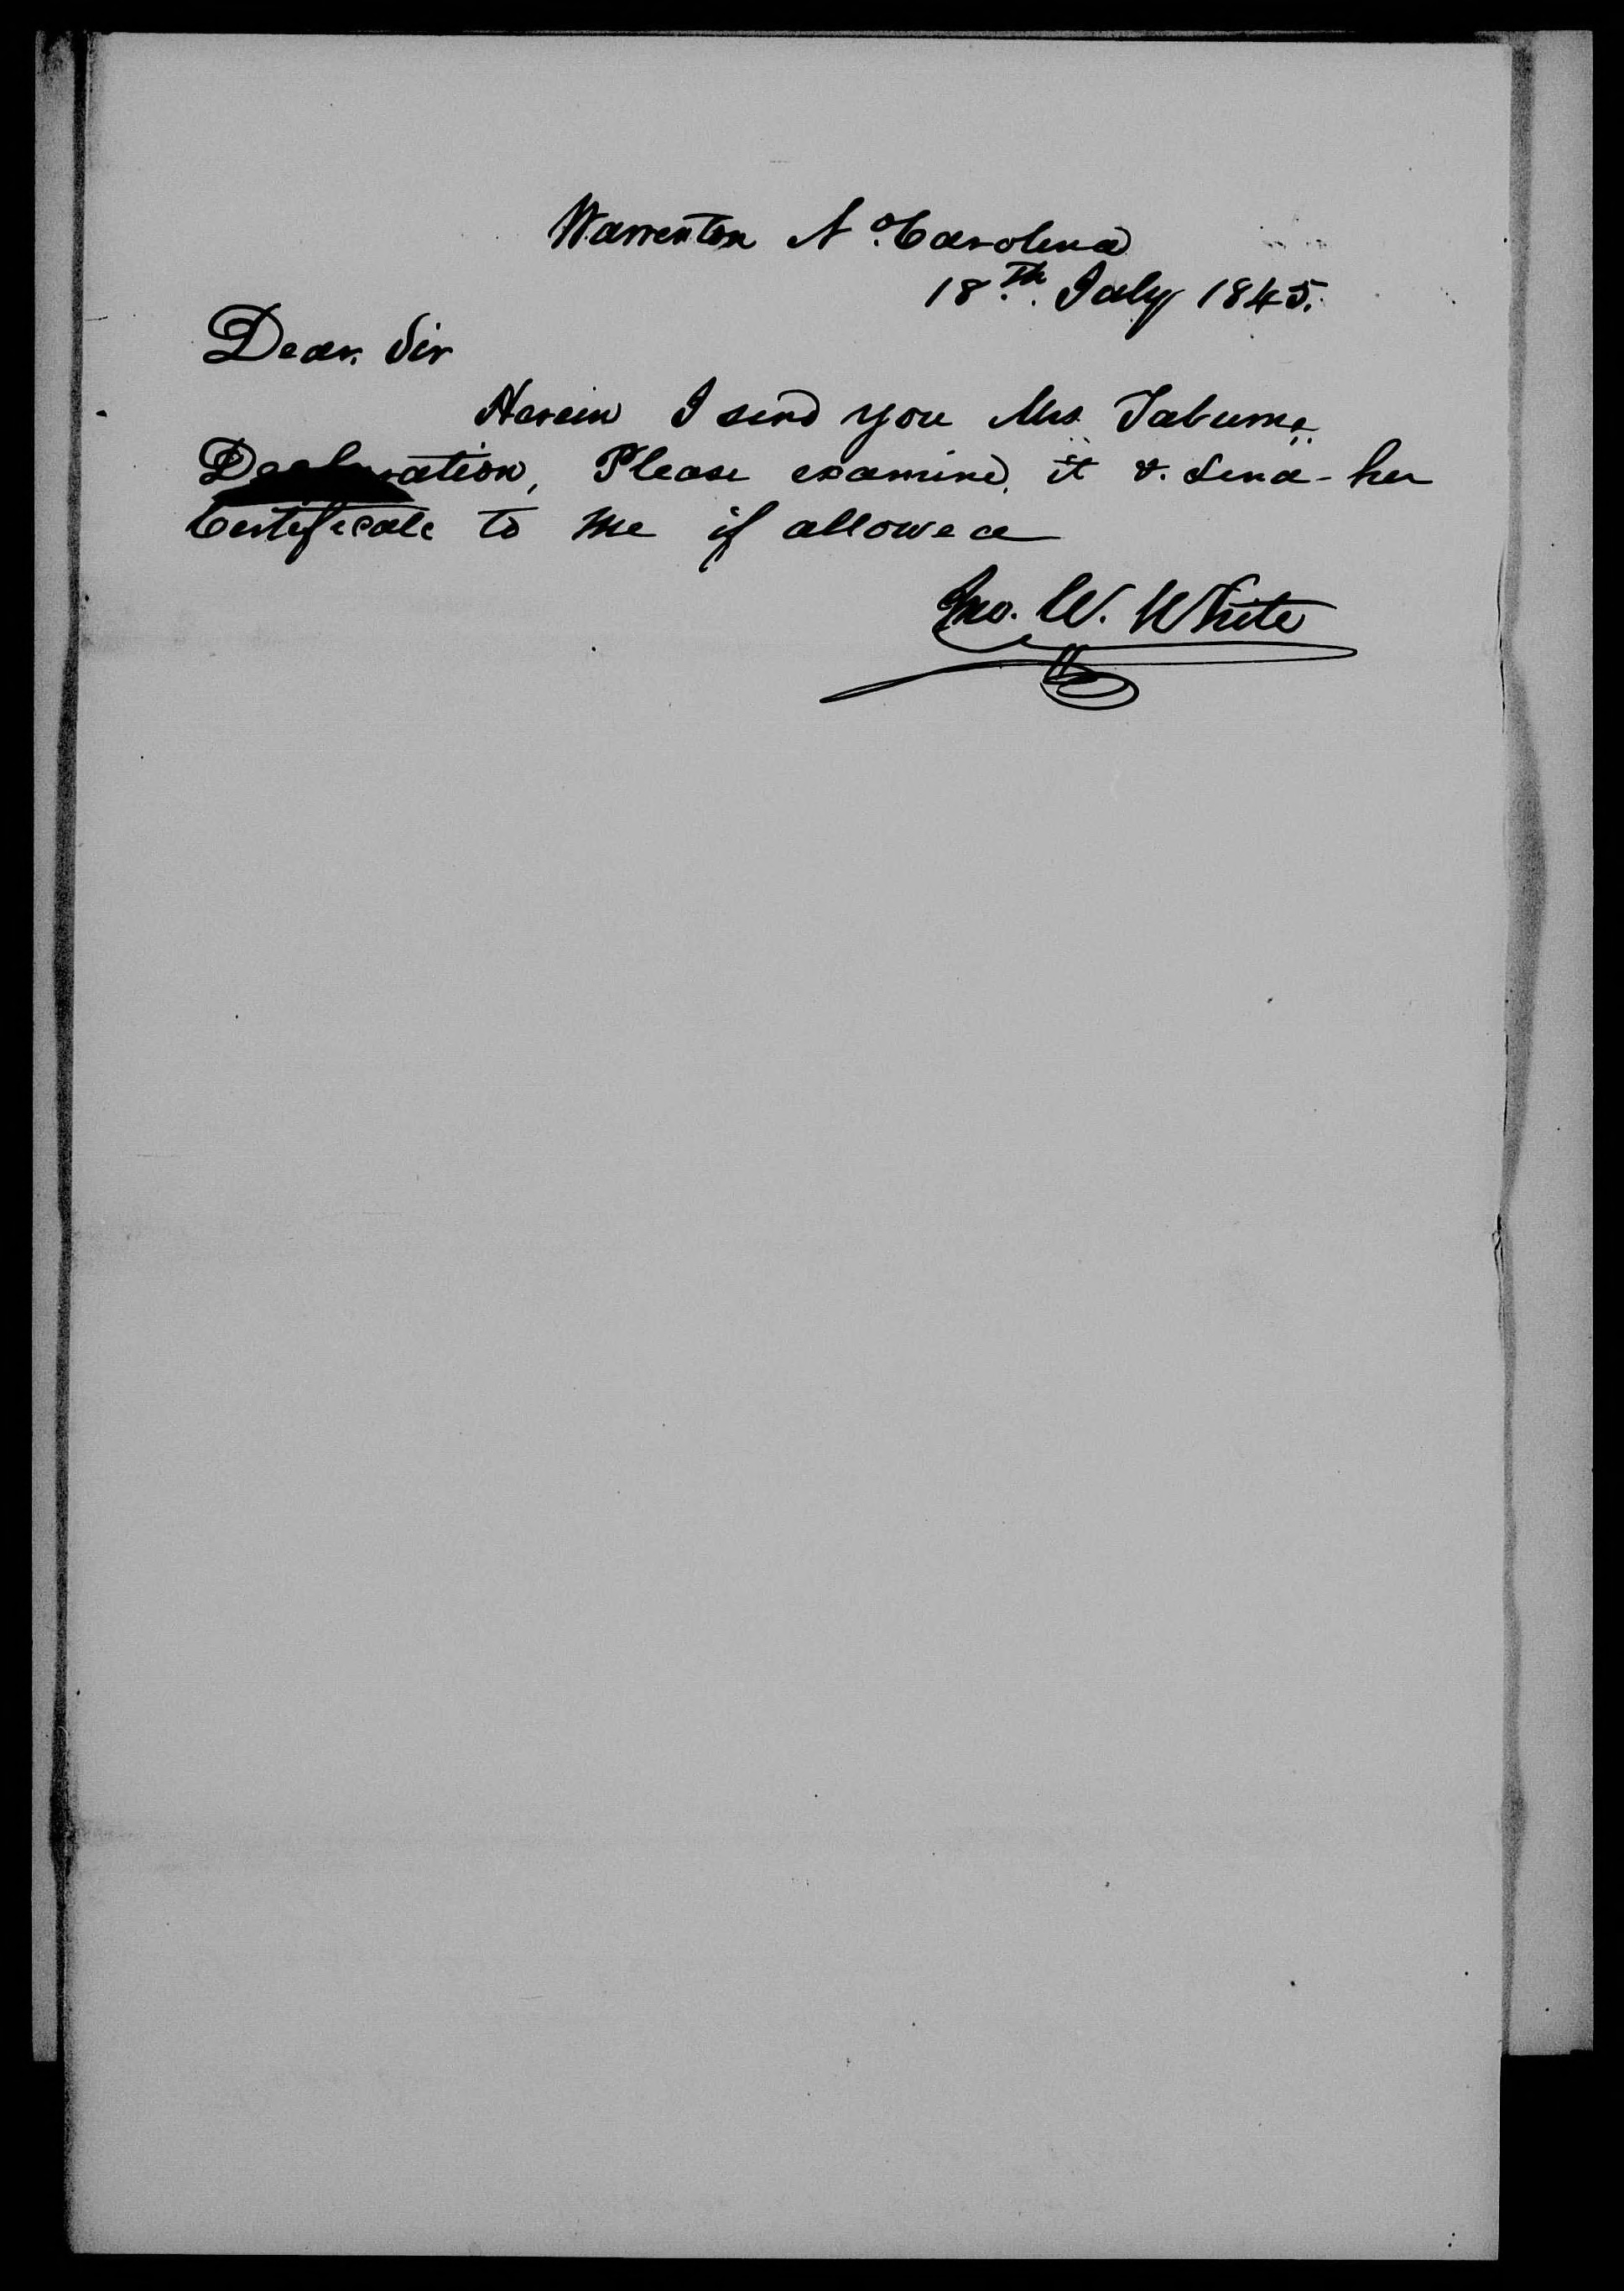 Letter from John W. White to James L. Edwards, 18 July 1845, page 1